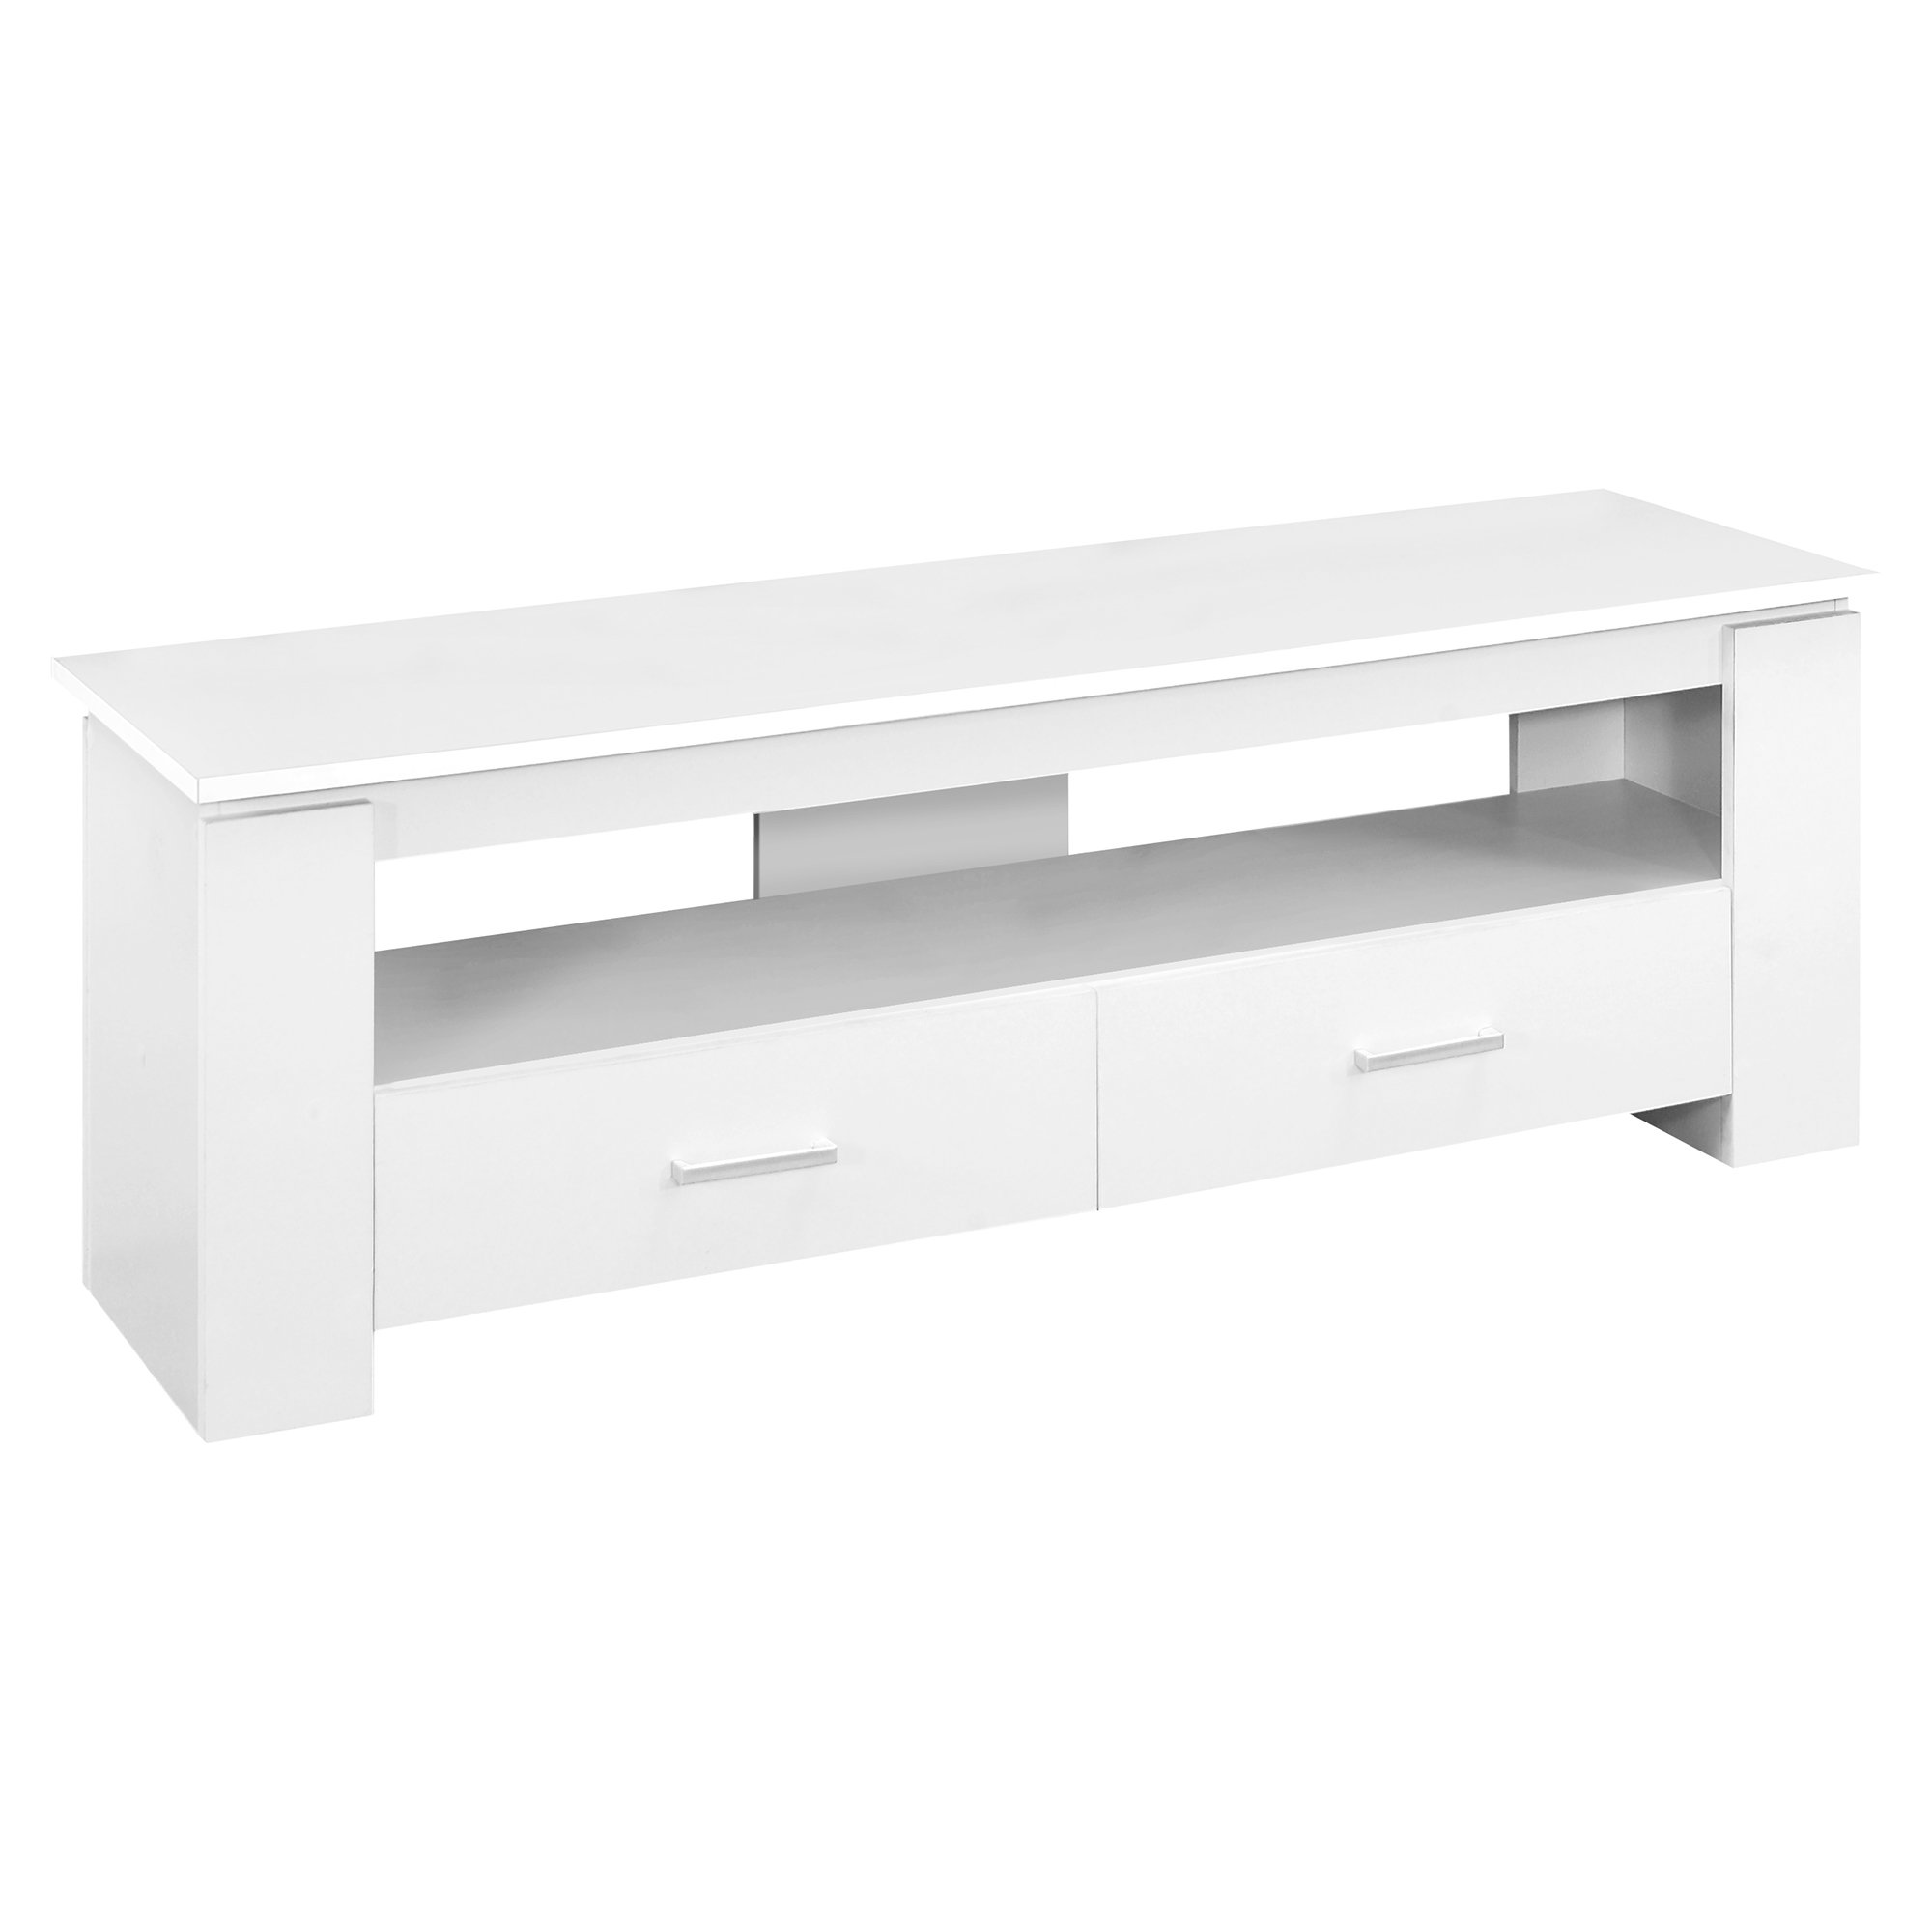 TV STAND - 48"L / WHITE WITH 2 STORAGE DRAWERS